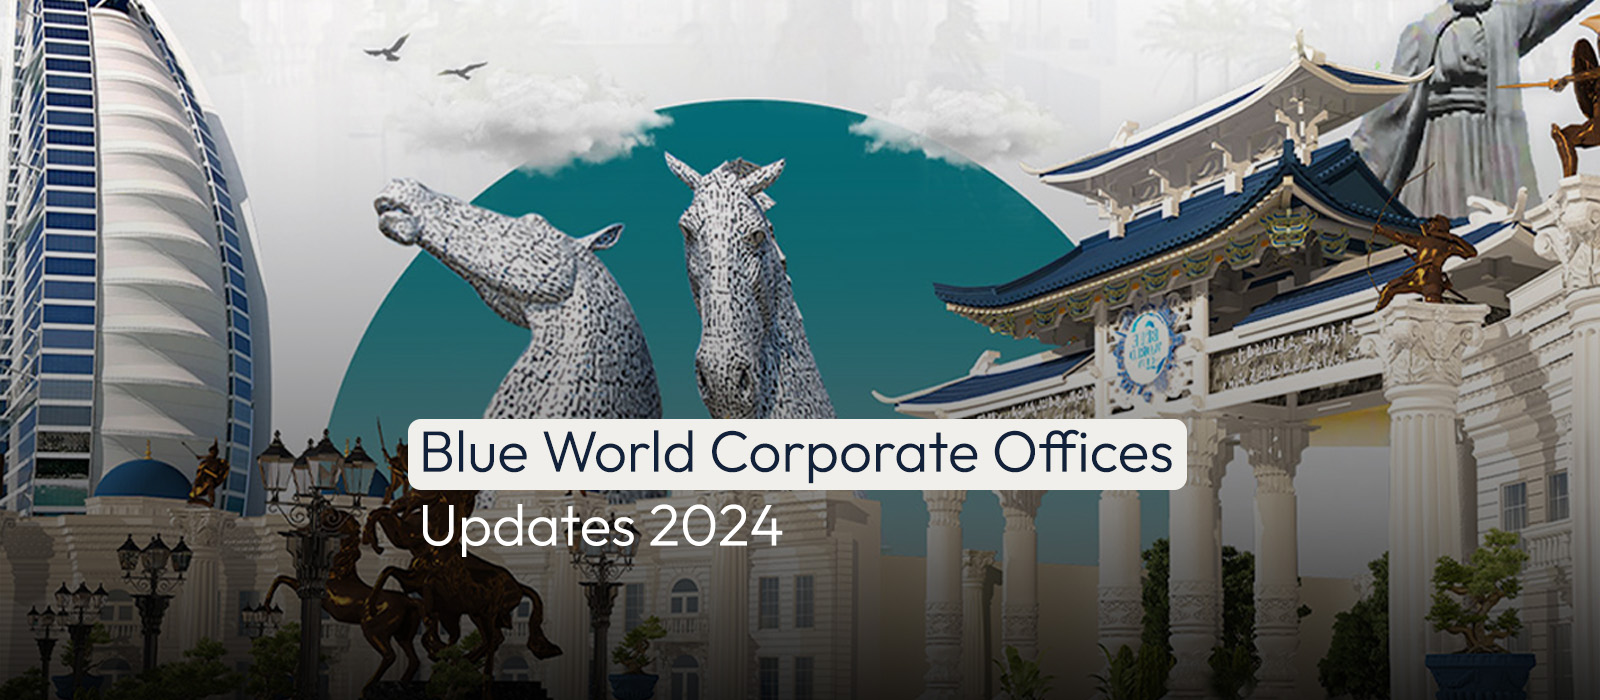 Blue World Corporate Offices Updates 2024